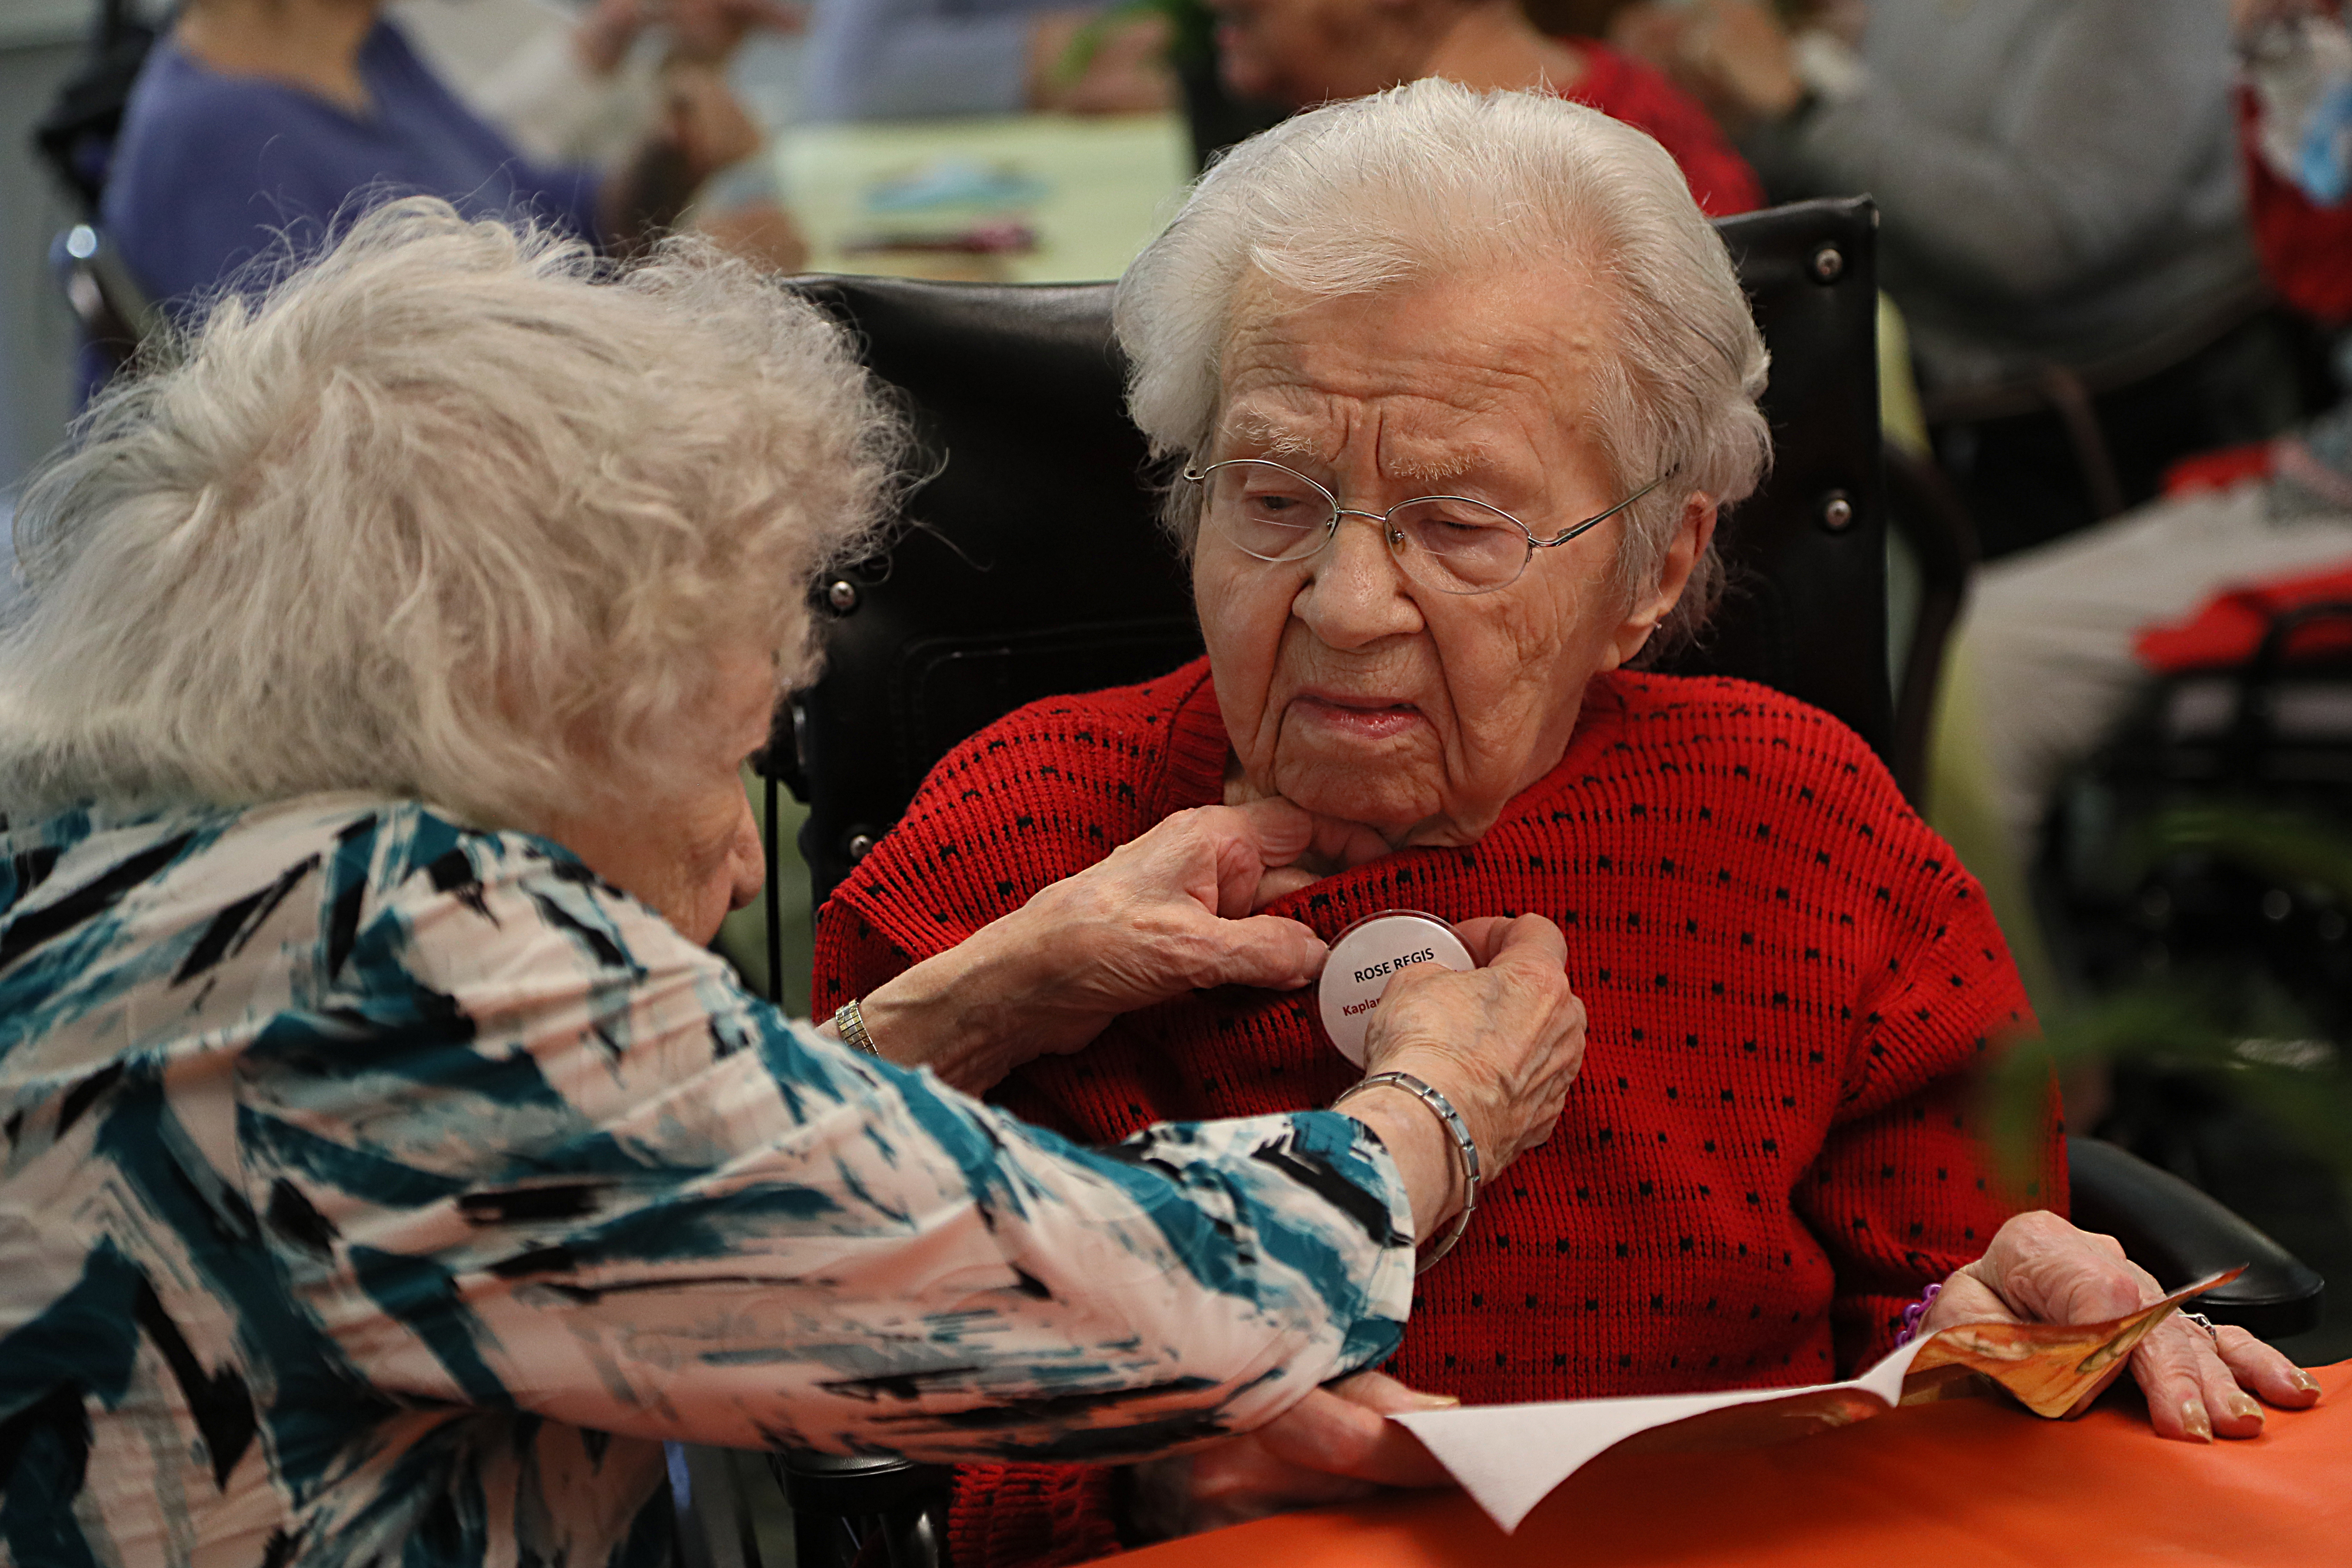 Kay Morrocco, 101, helps Rose Regis, 107, with her badge.  While there are differing opinions on why Century Club members live such long and independent lives, there is general agreement that they are proof that the aging process can be a process of aging. dignity, joy and humor.